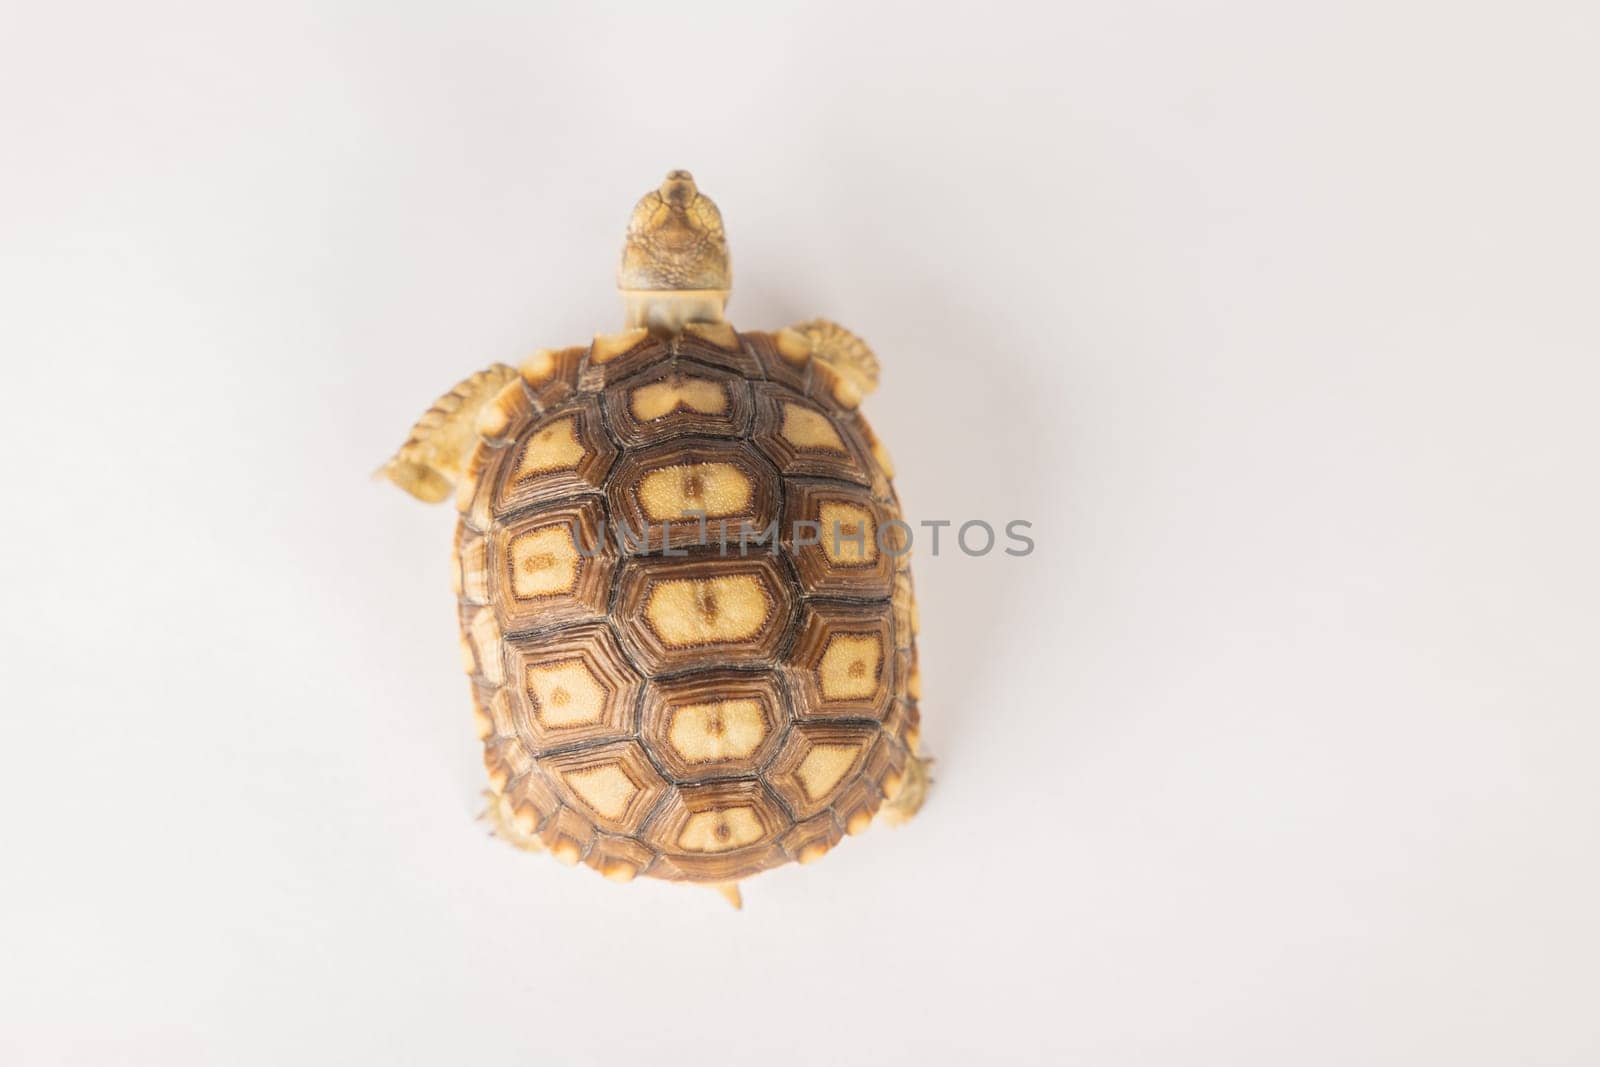 African spurred tortoise, or sulcata tortoise, is showcased in this isolated portrait, emphasizing the beauty of its unique design against a white background. by Sorapop